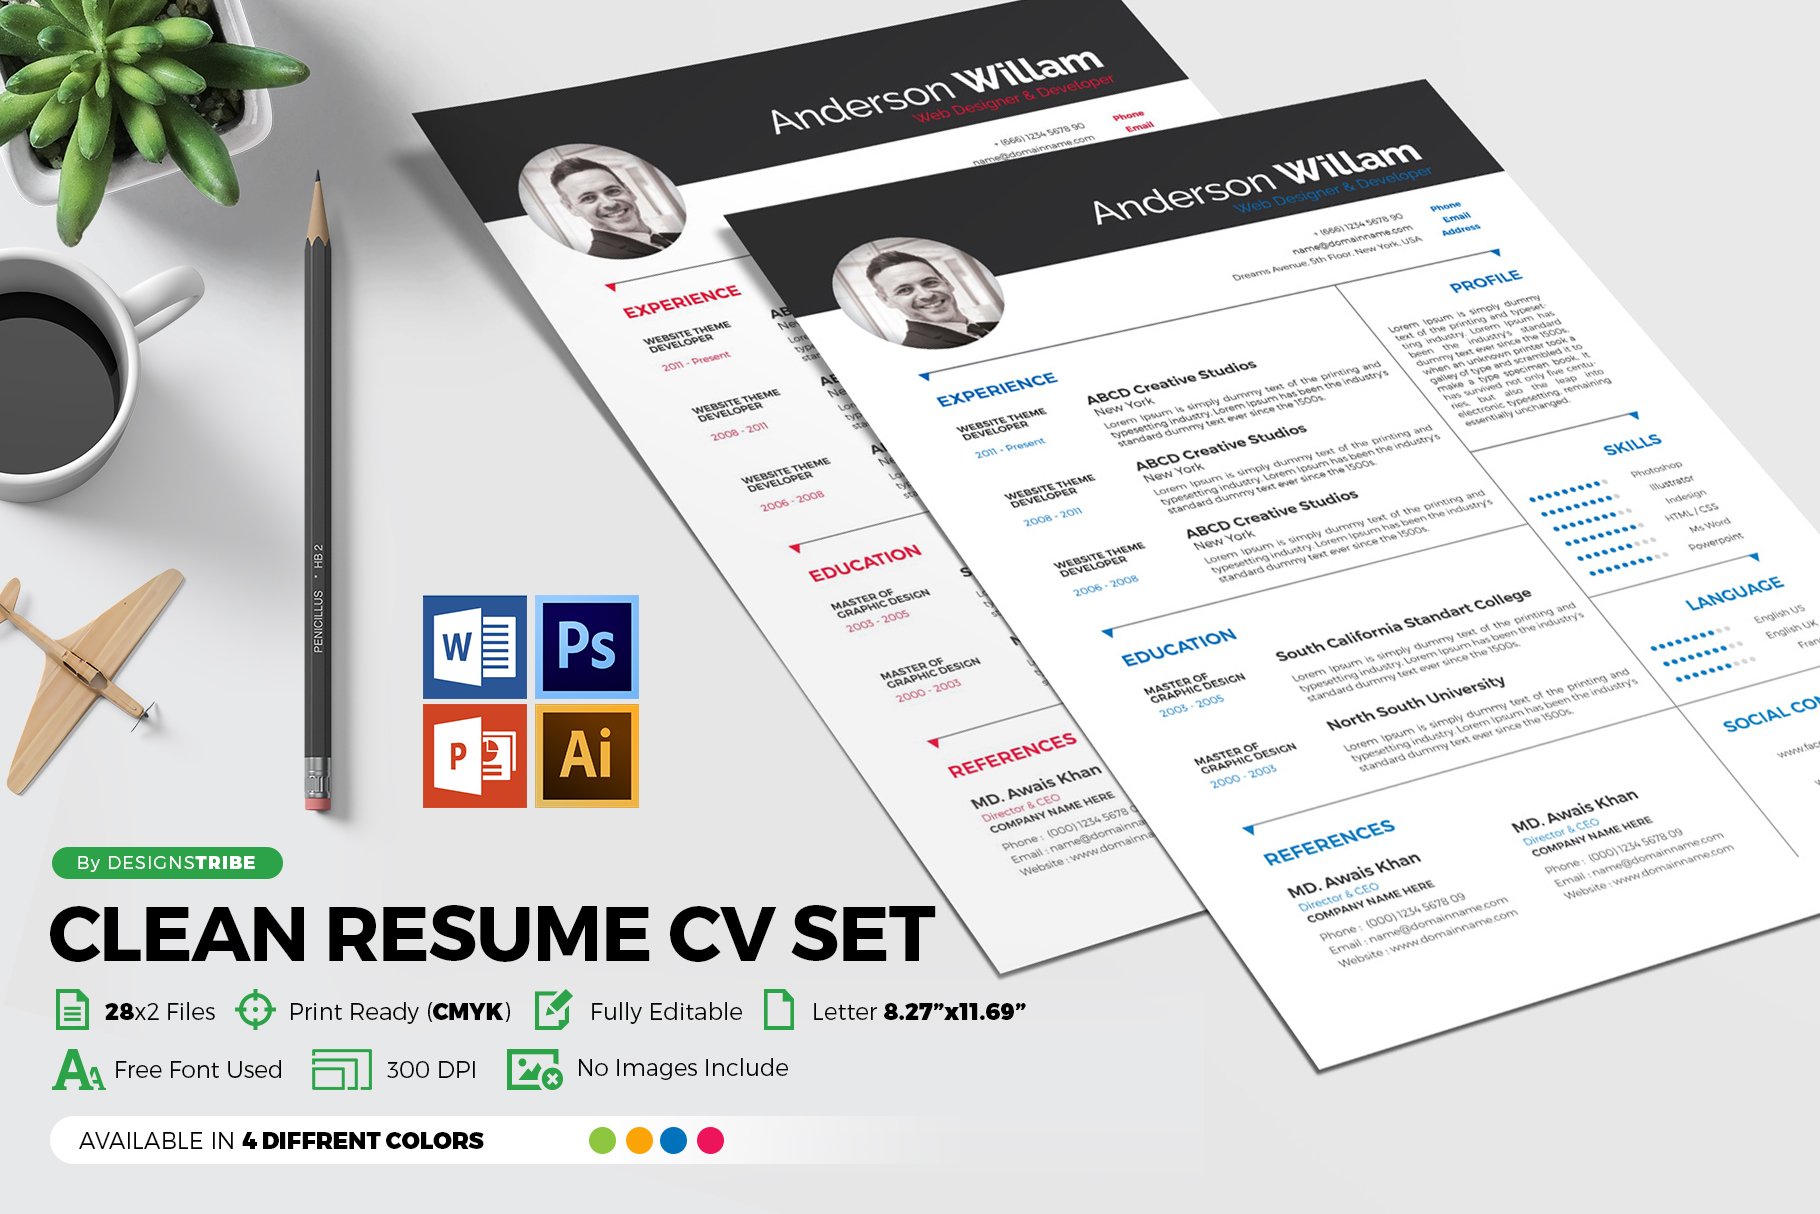 Resume CV with Word & PPT cover image.